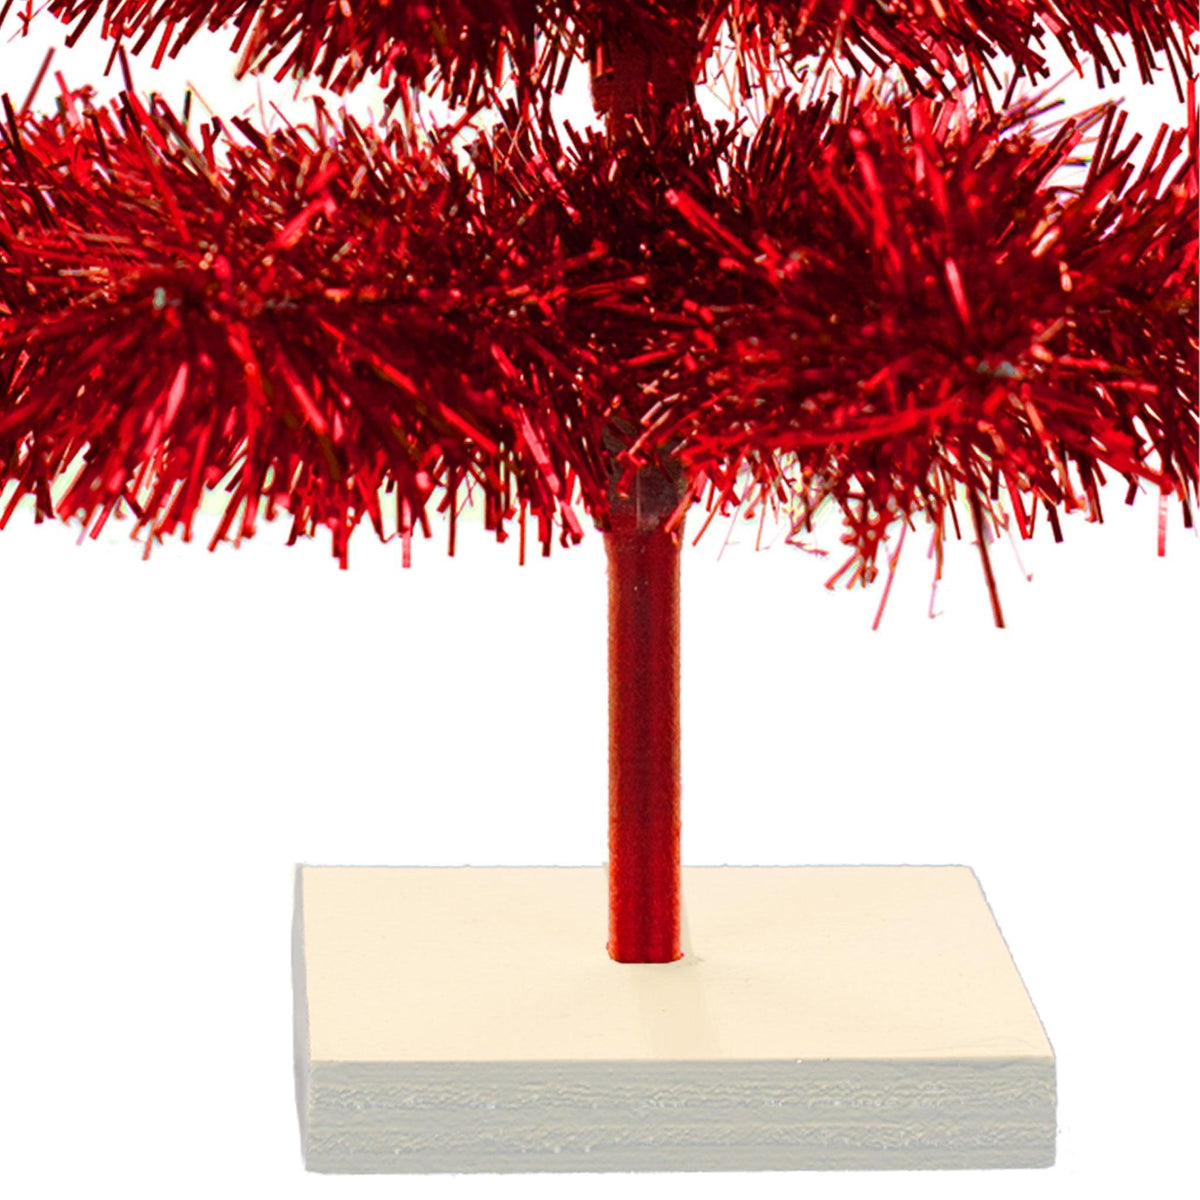 24in Red trees comes with white wood stand that is easy to detach and secures the trees upright